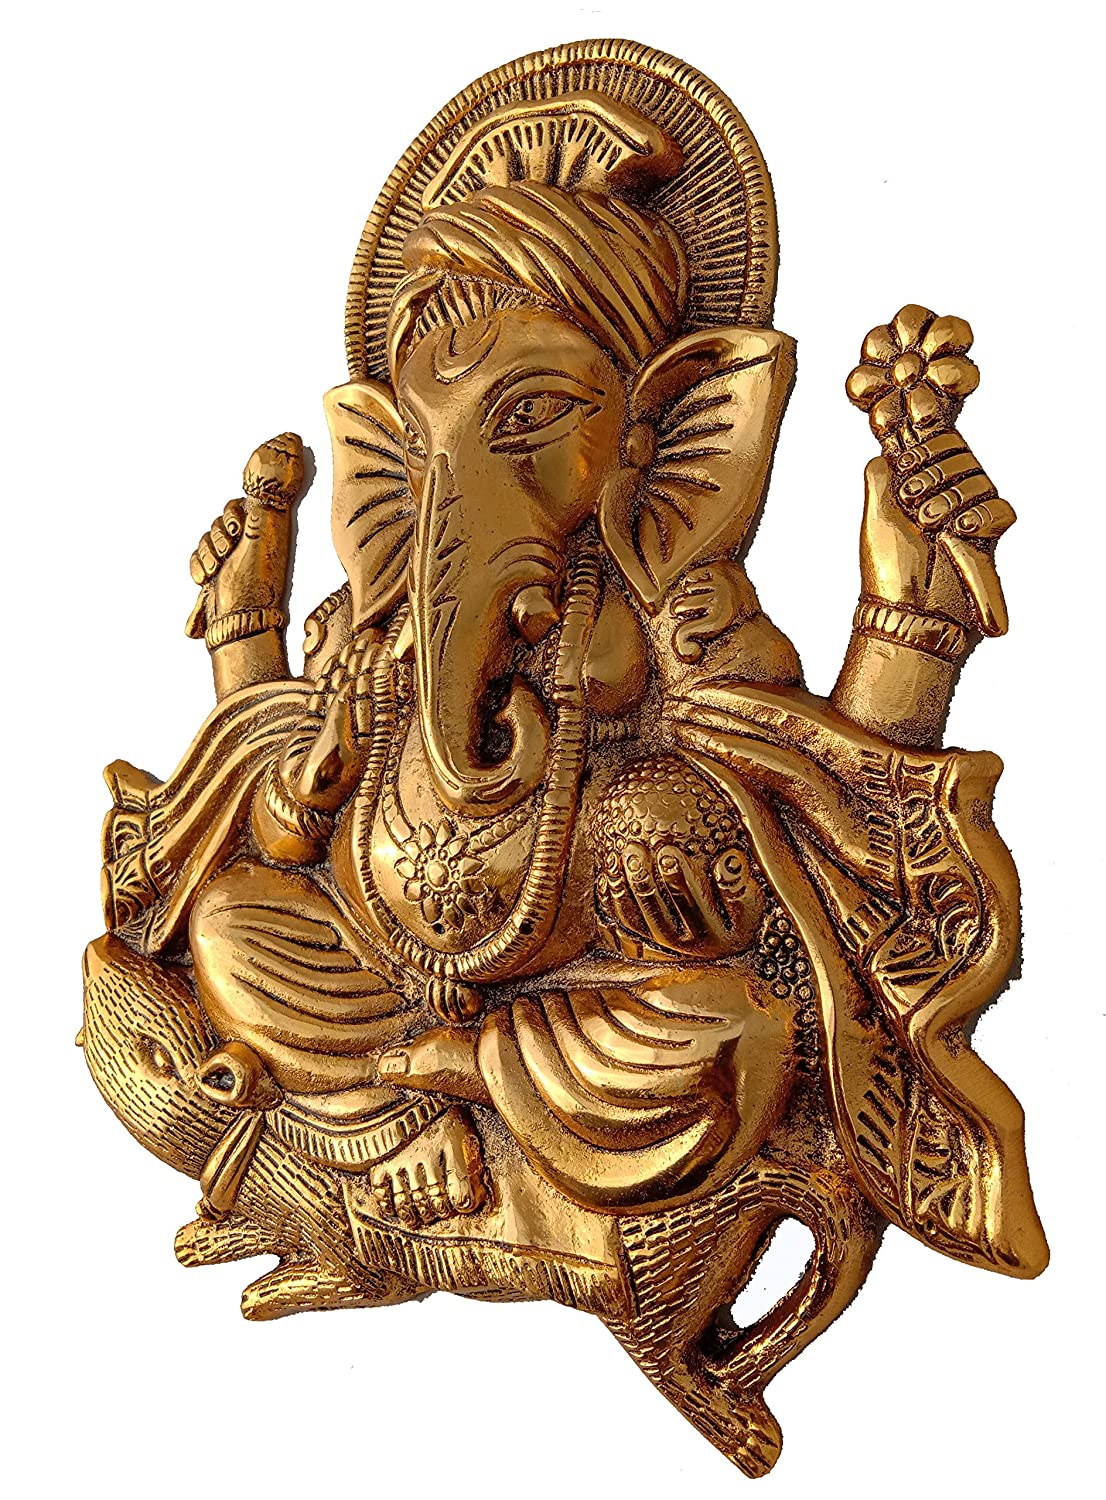 Metal Ganesh Idol Statue Wall Hanging for Home Decor Wall Decor (Golden, 11 Inches Height) - GreentouchCrafts